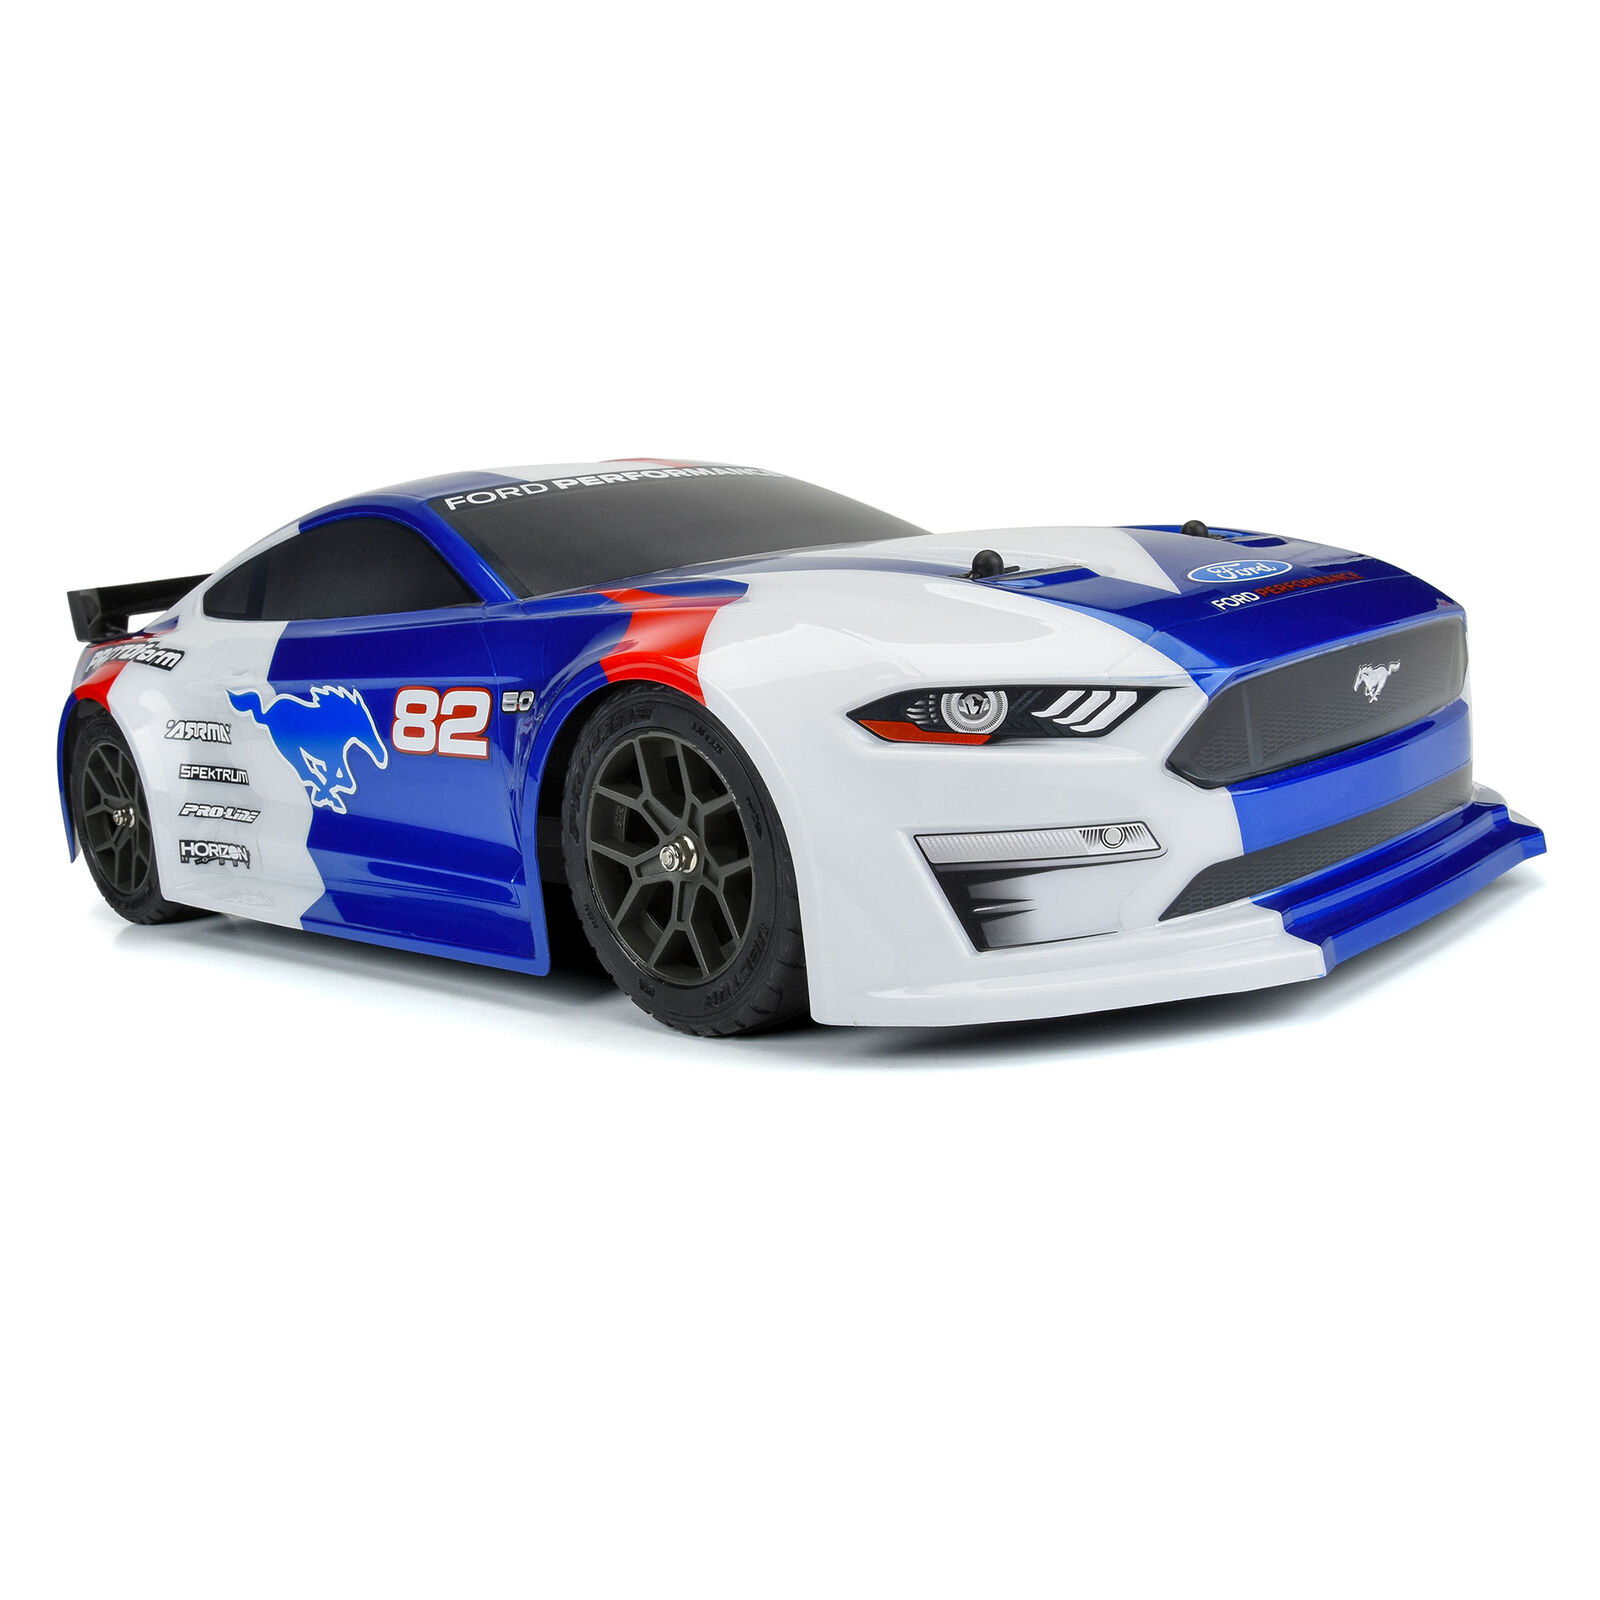 Pro-line - 1/8 Body Painted Ford PROTOform 2021 Infraction Mustang (Blue): Vendetta | & 3S Pro-Line Racing